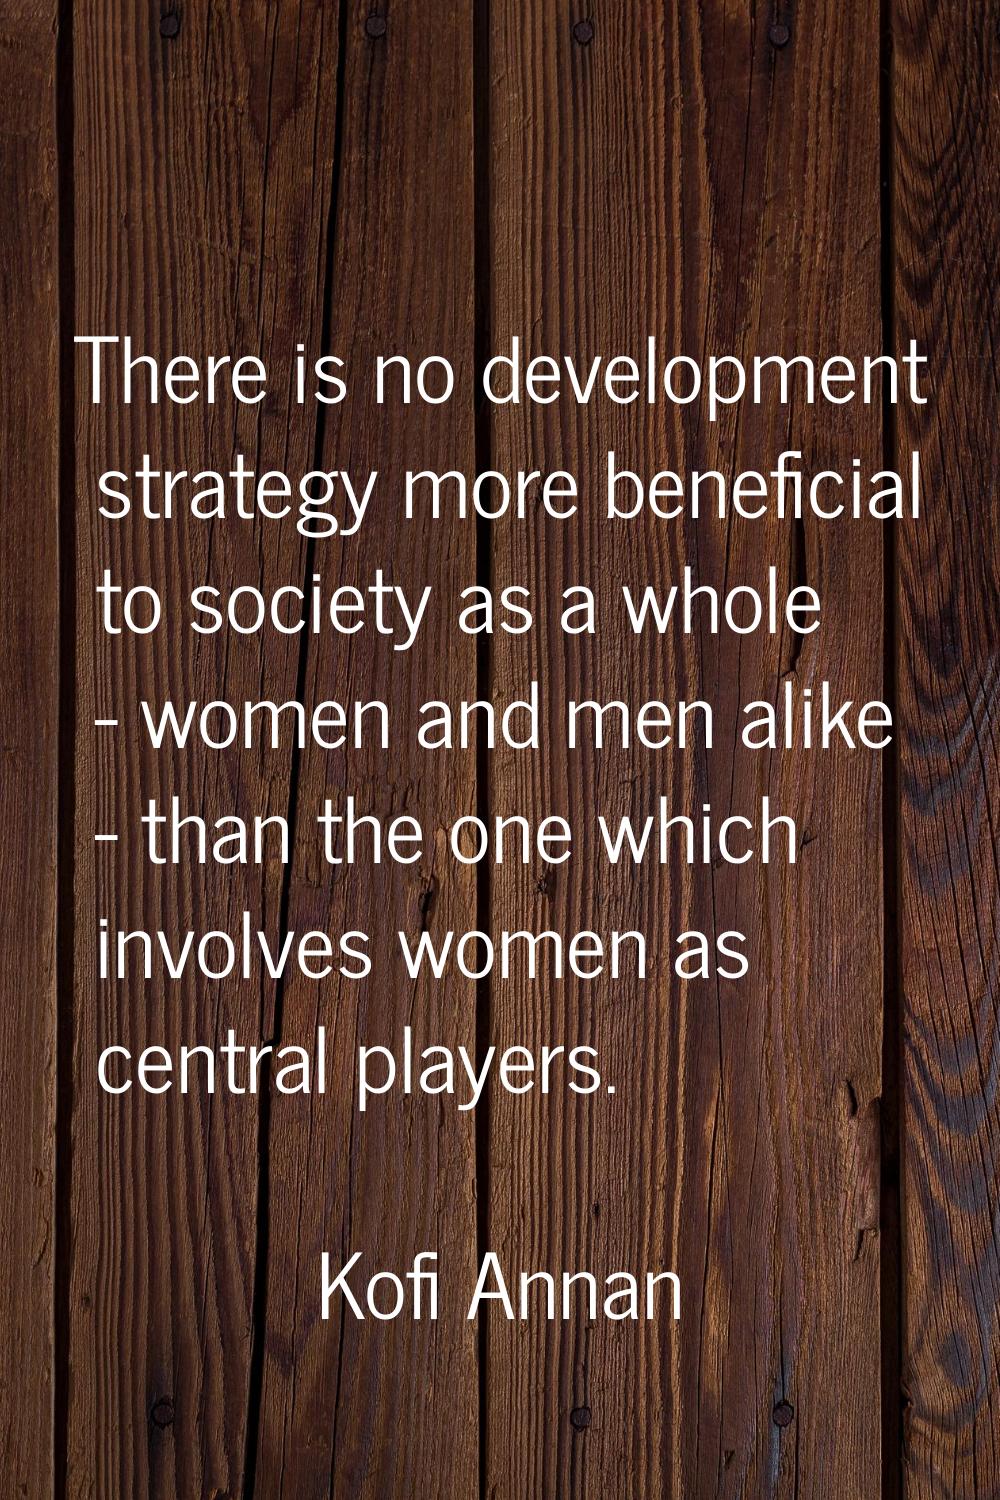 There is no development strategy more beneficial to society as a whole - women and men alike - than